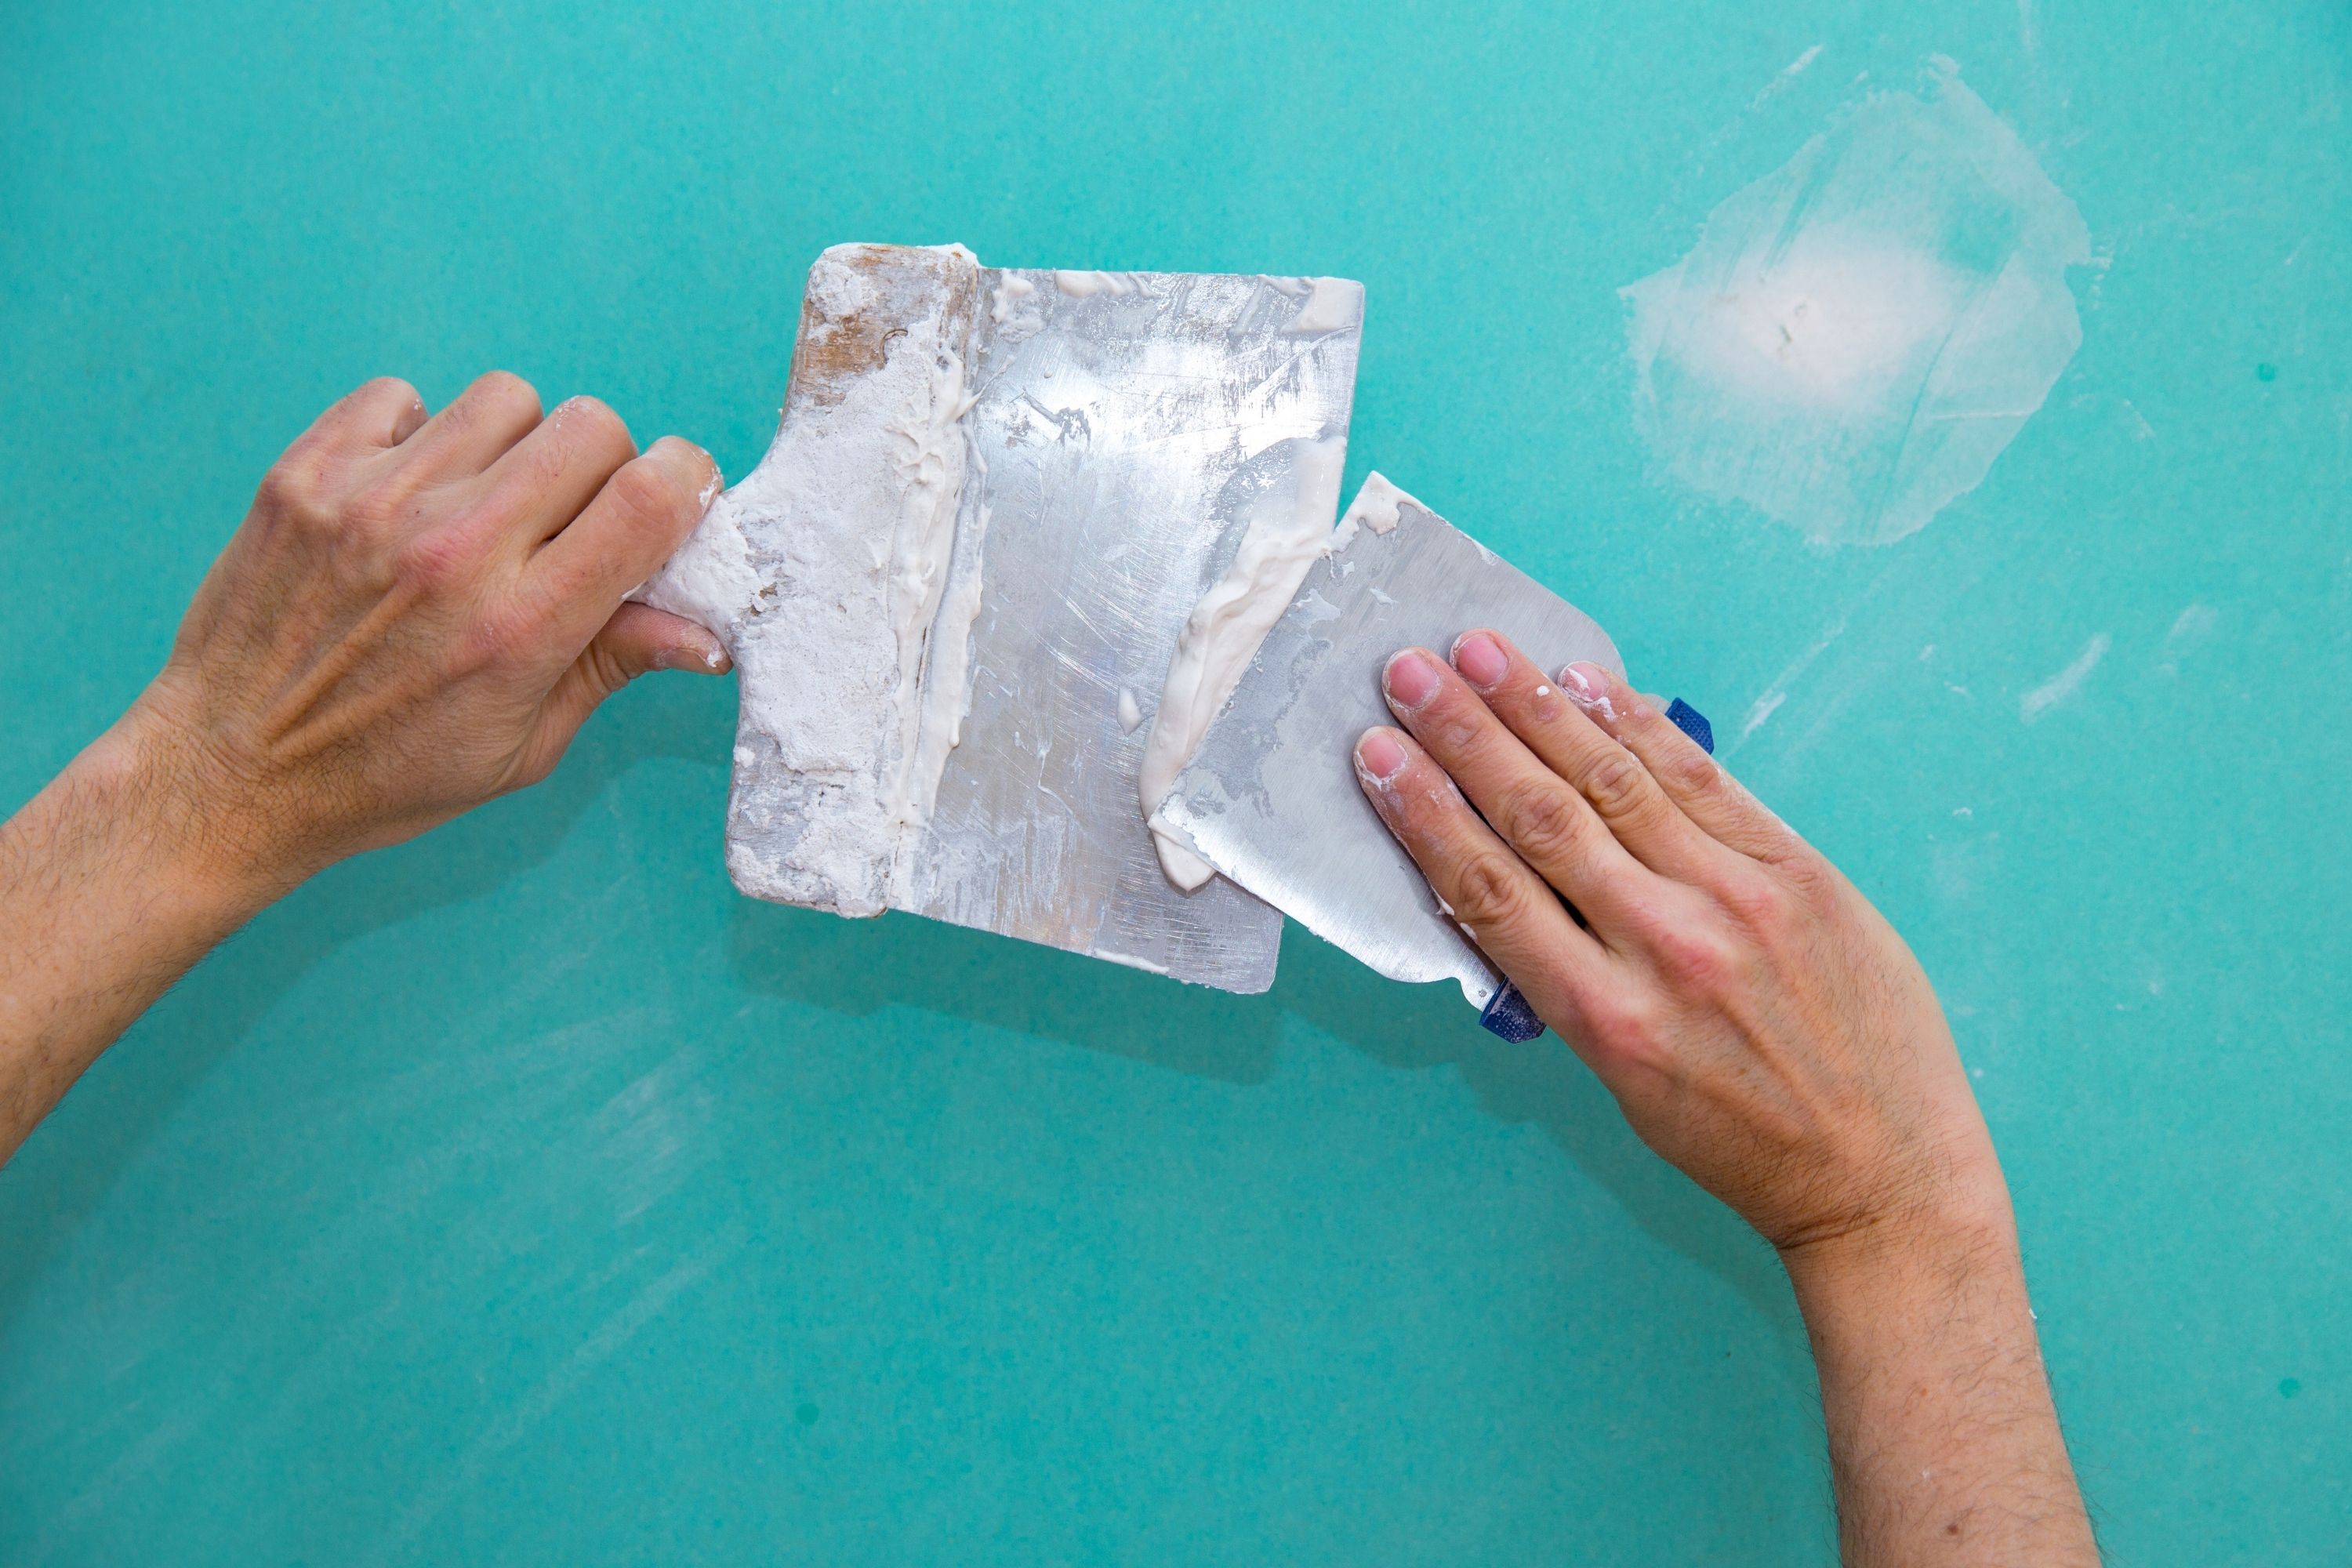 Drywall vs Plaster. How to Tell check for hardness